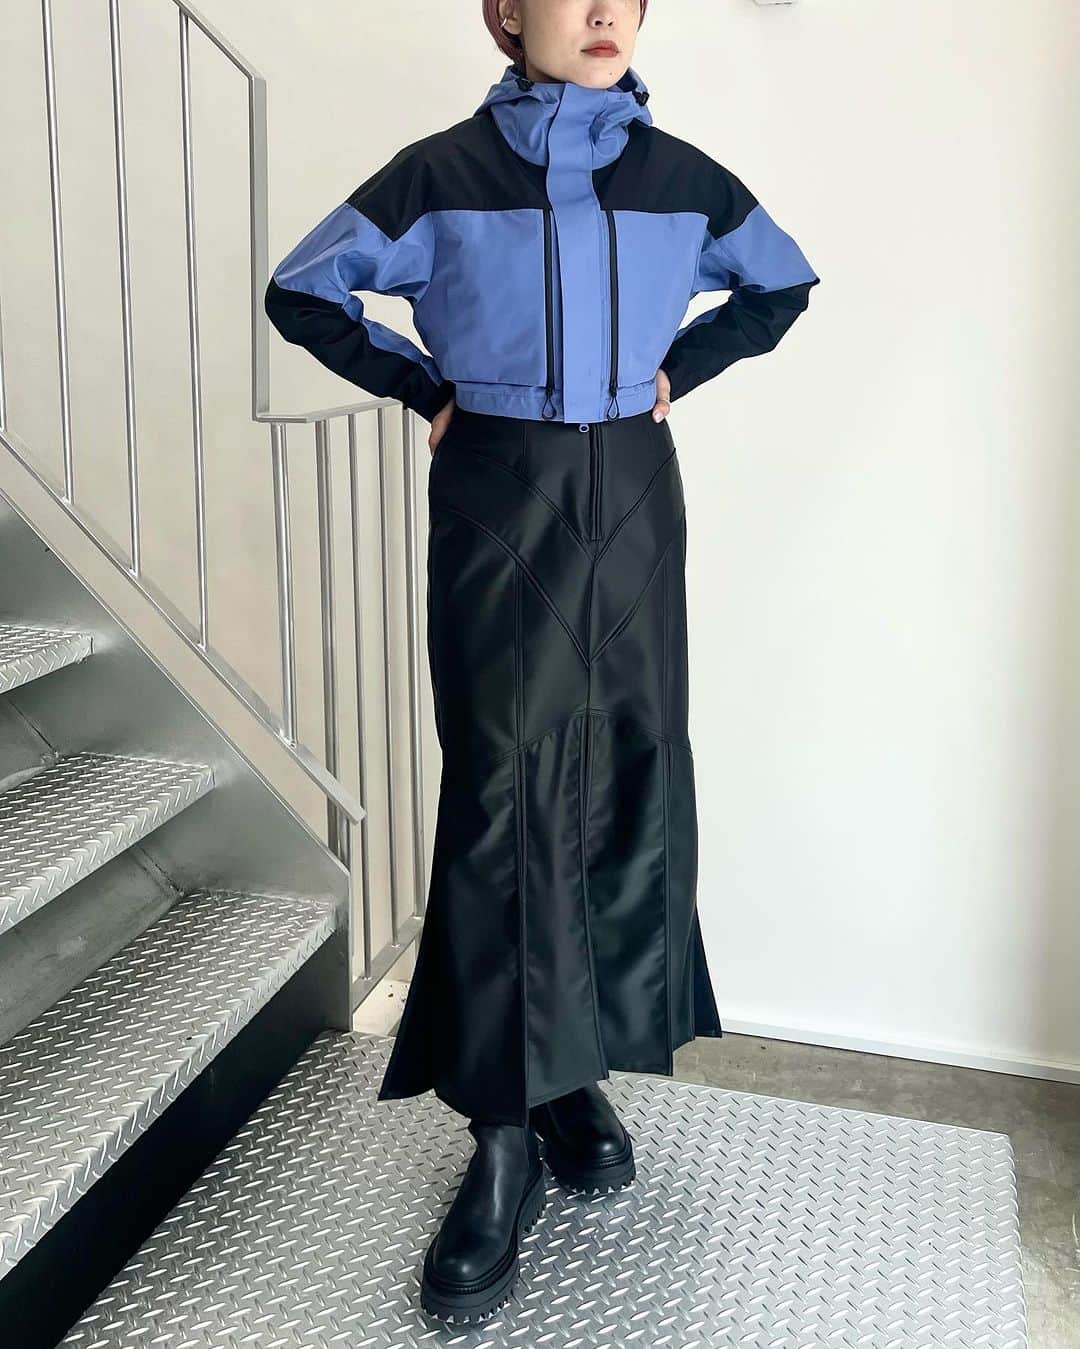 MIDWEST TOKYO WOMENのインスタグラム：「. 【outer】 windstopper citified utility jacket crop @marmot_capital lightblue,black / size xs,s  【skirt】 faux-lether slit skirt @fetico_official black,beige / size 1,2,3  【shoes】 side gore boots black / size 35-39  staff 160cm @midwest_tw」